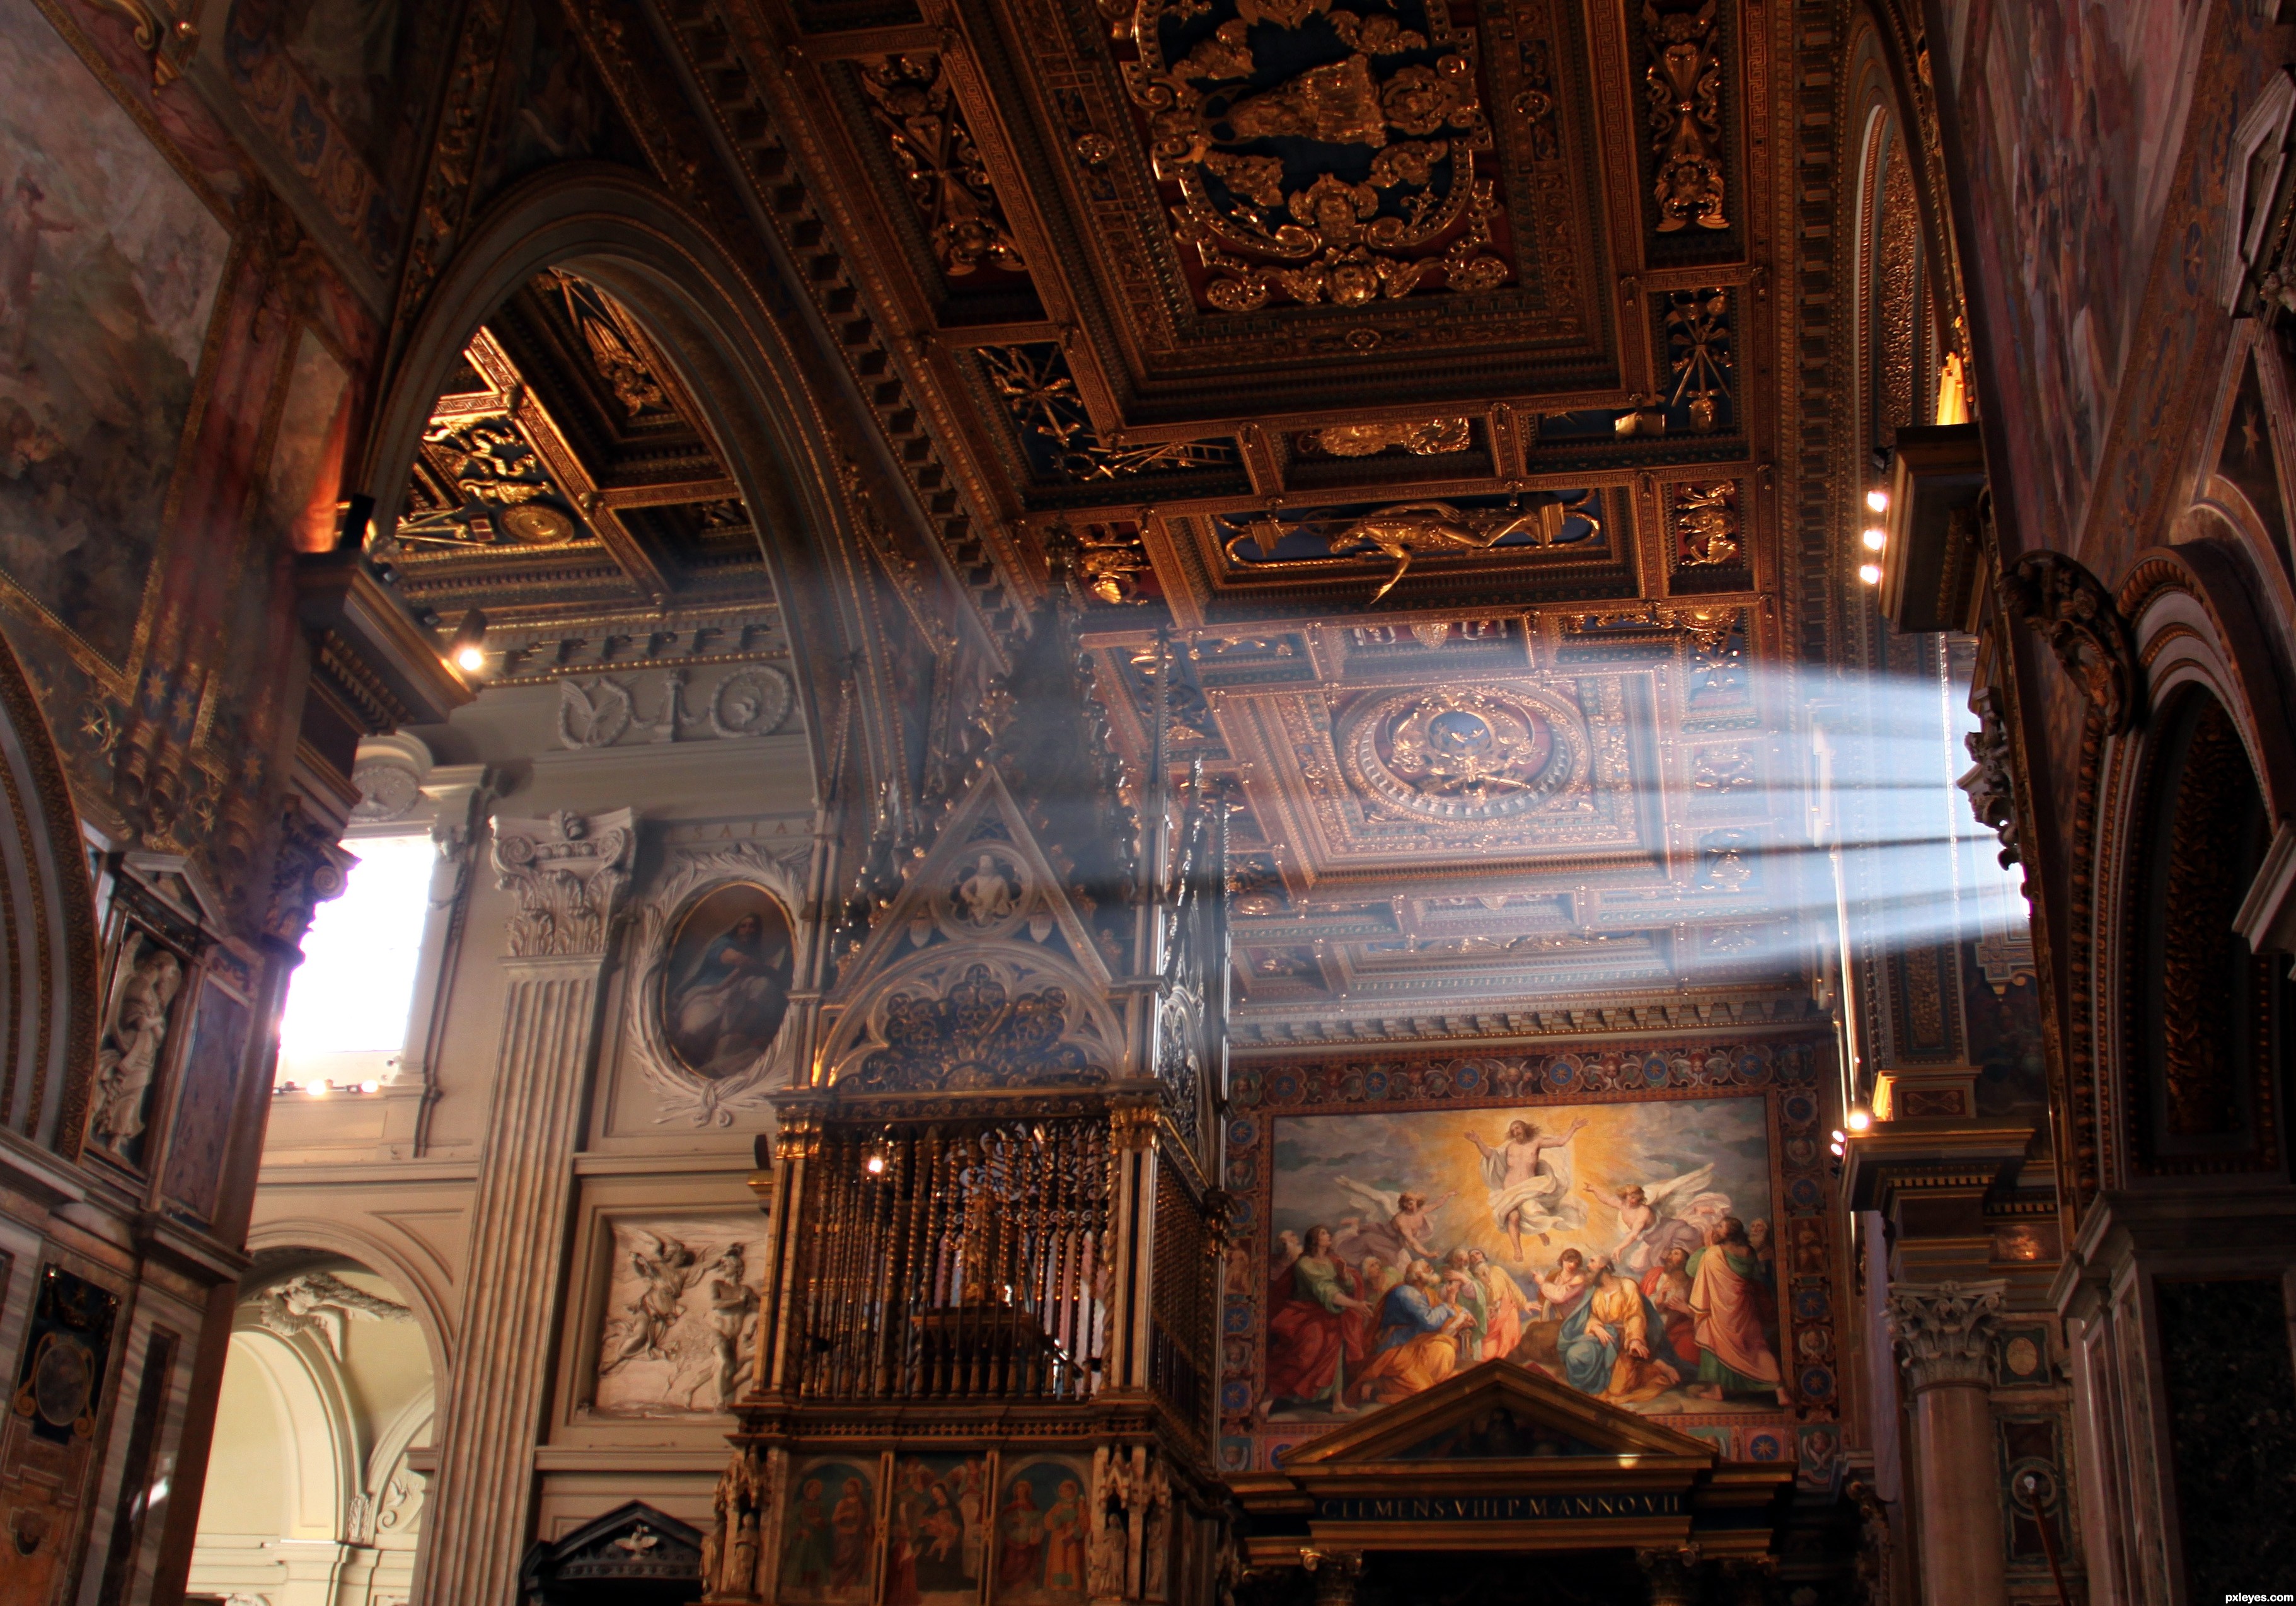 Rays in the church picture, by patty for: light rays 2 photography ...